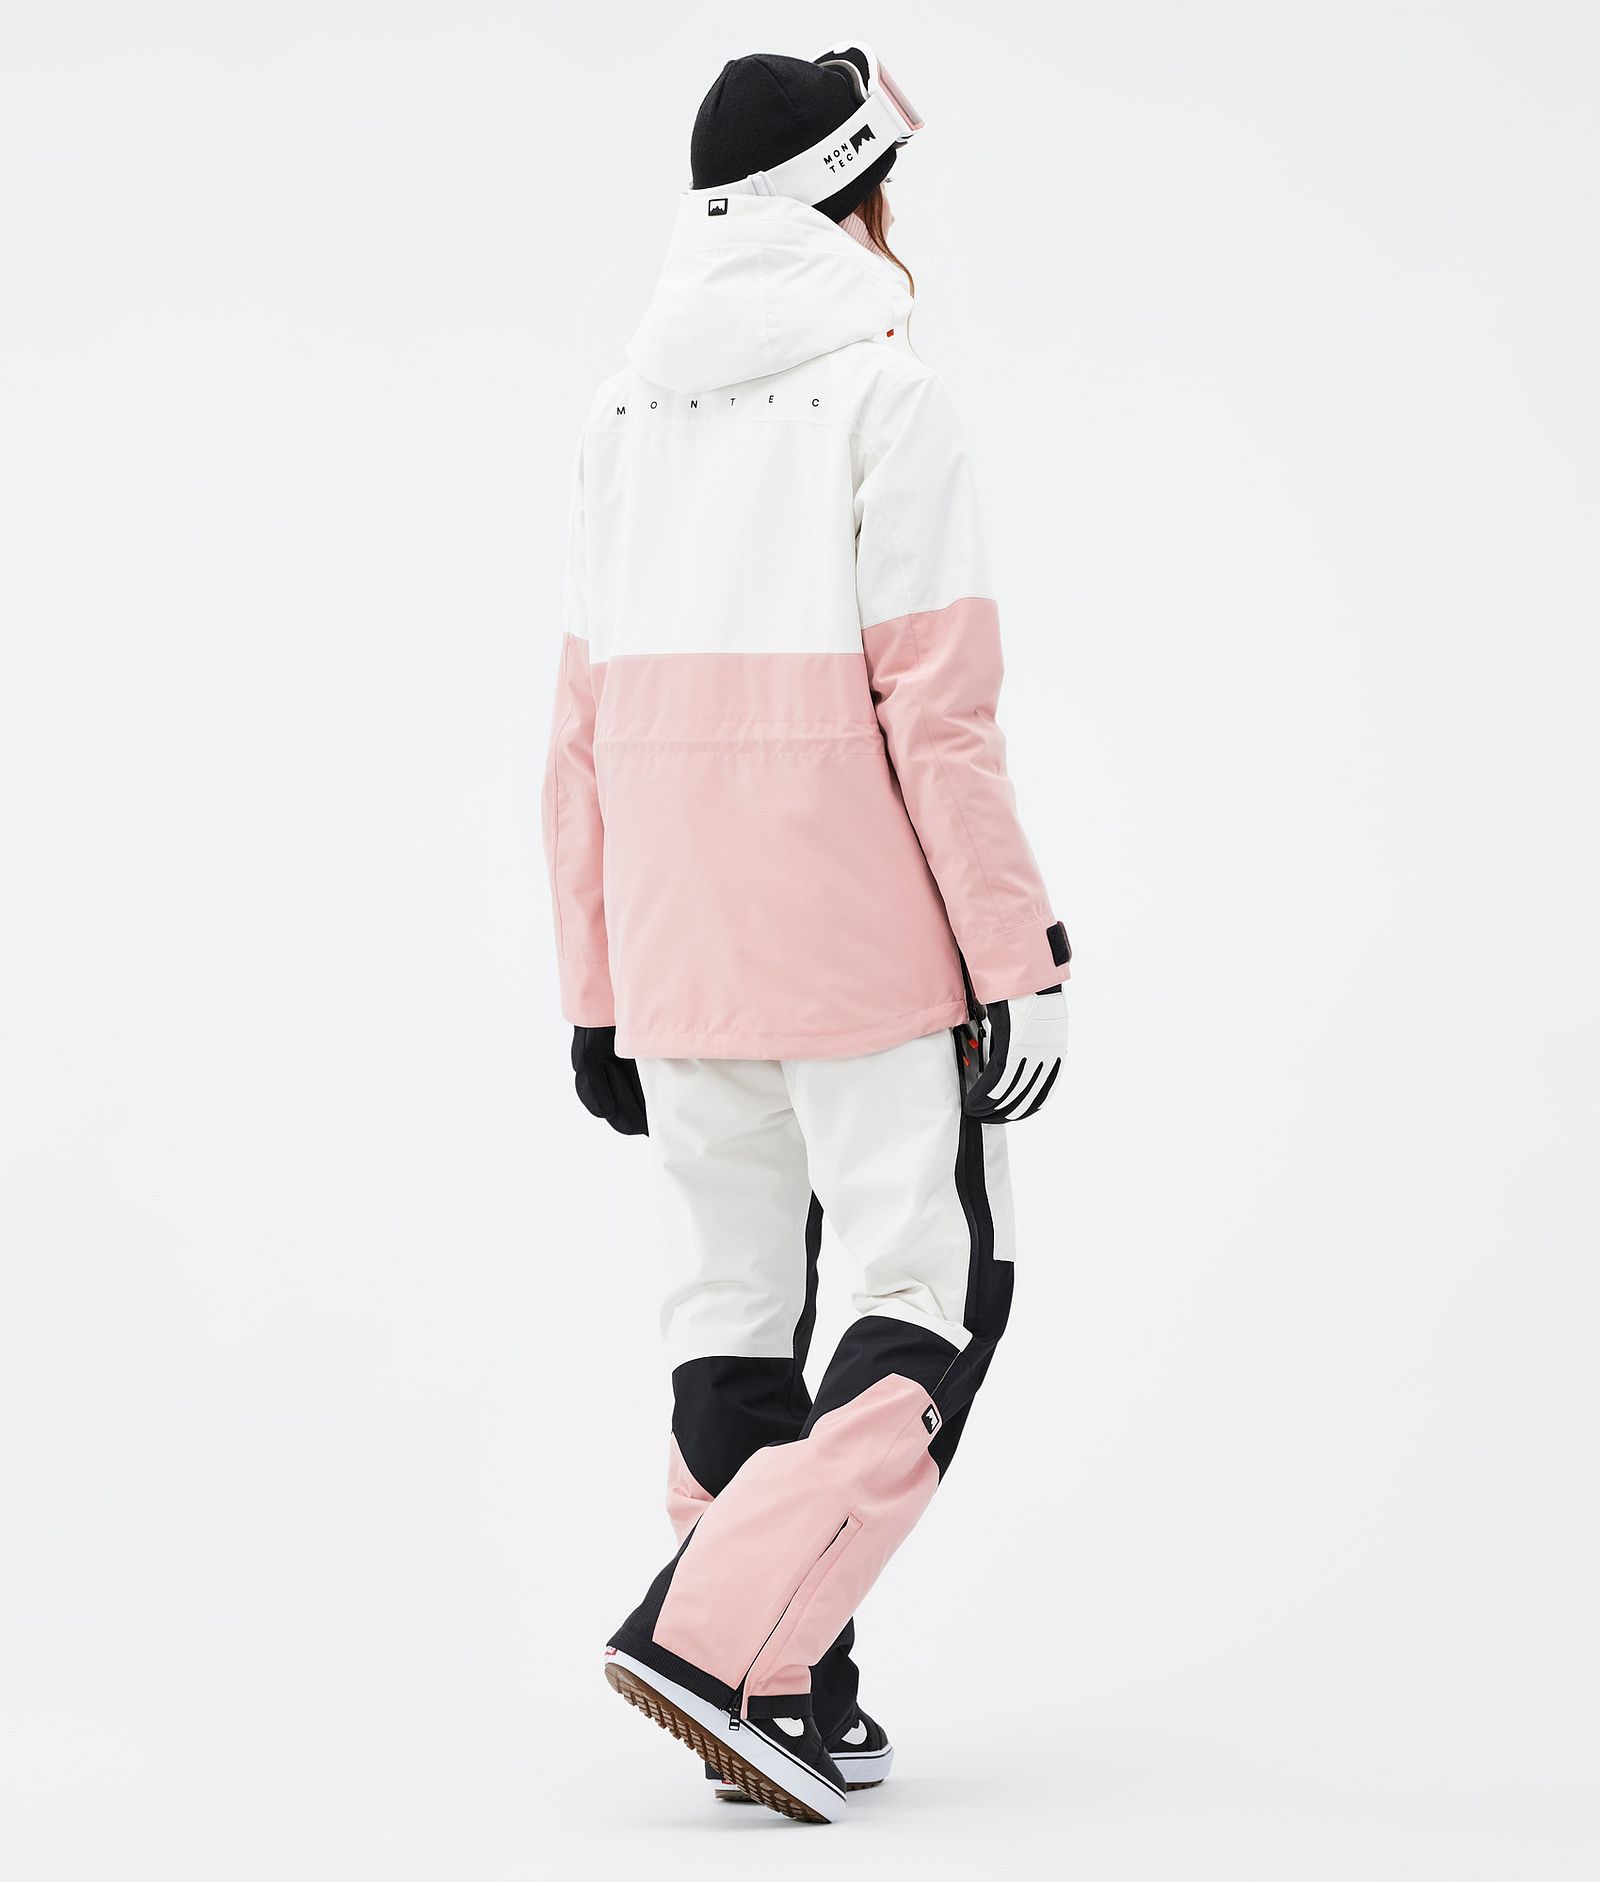 Dune W Outfit de Snowboard Mujer Old White/Black/Soft Pink